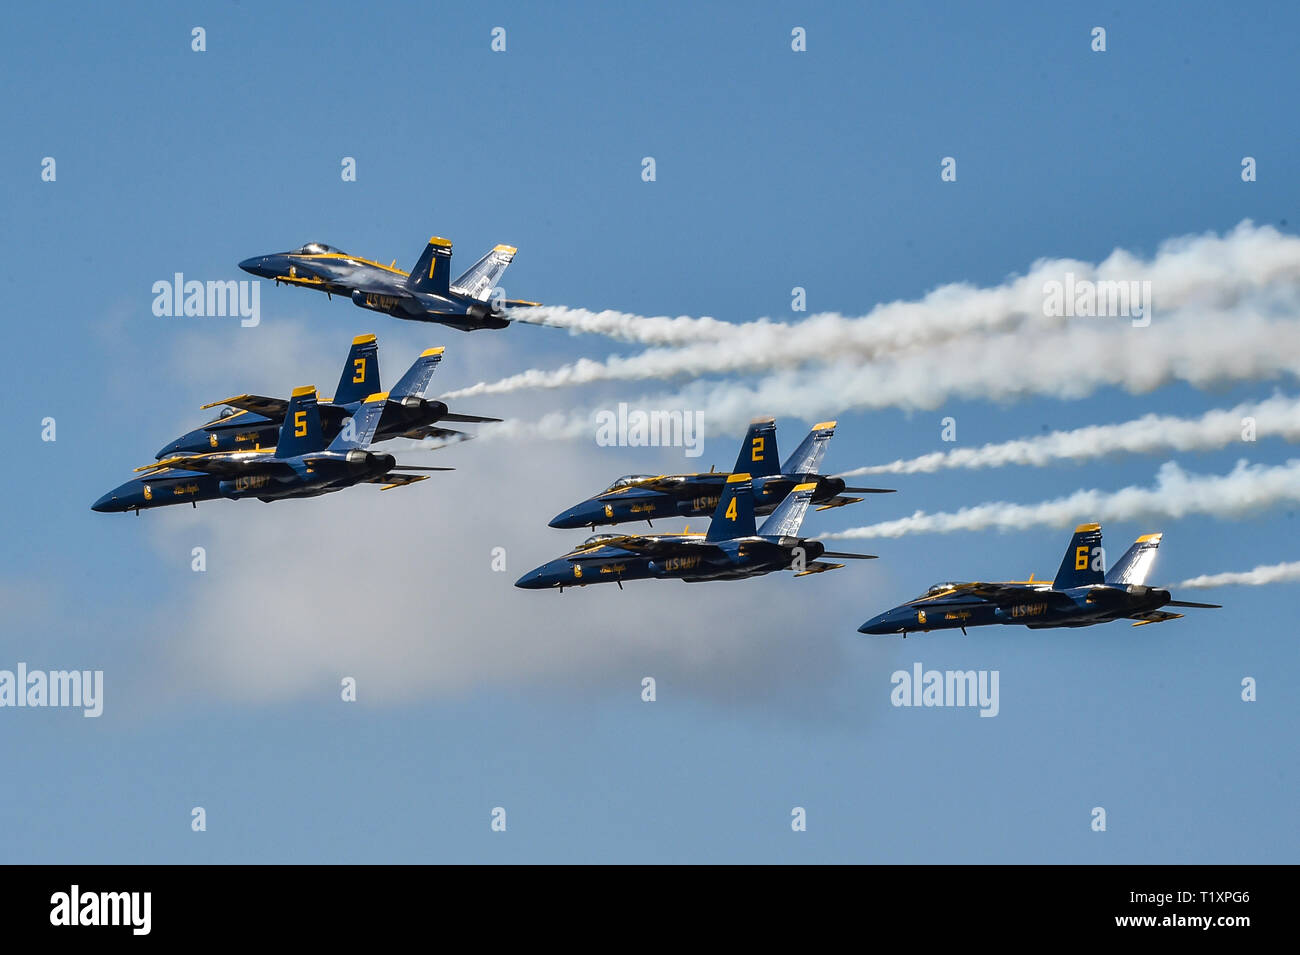 190323-N-UK306-1926 SALINAS, Calif. (March 23, 2019) The U.S. Navy Flight Demonstration Squadron, the Blue Angels, perform the “pitch up break“ maneuver during a demonstration at the California International Airshow at the Salinas Municipal Airport. The team is scheduled to conduct 61 flight demonstrations at 32 locations across the country to showcase the pride and professionalism of the U.S. Navy and Marine Corps to the American public in 2019. (U.S. Navy photo by Mass Communication Specialist 2nd Class Timothy Schumaker/Released) Stock Photo